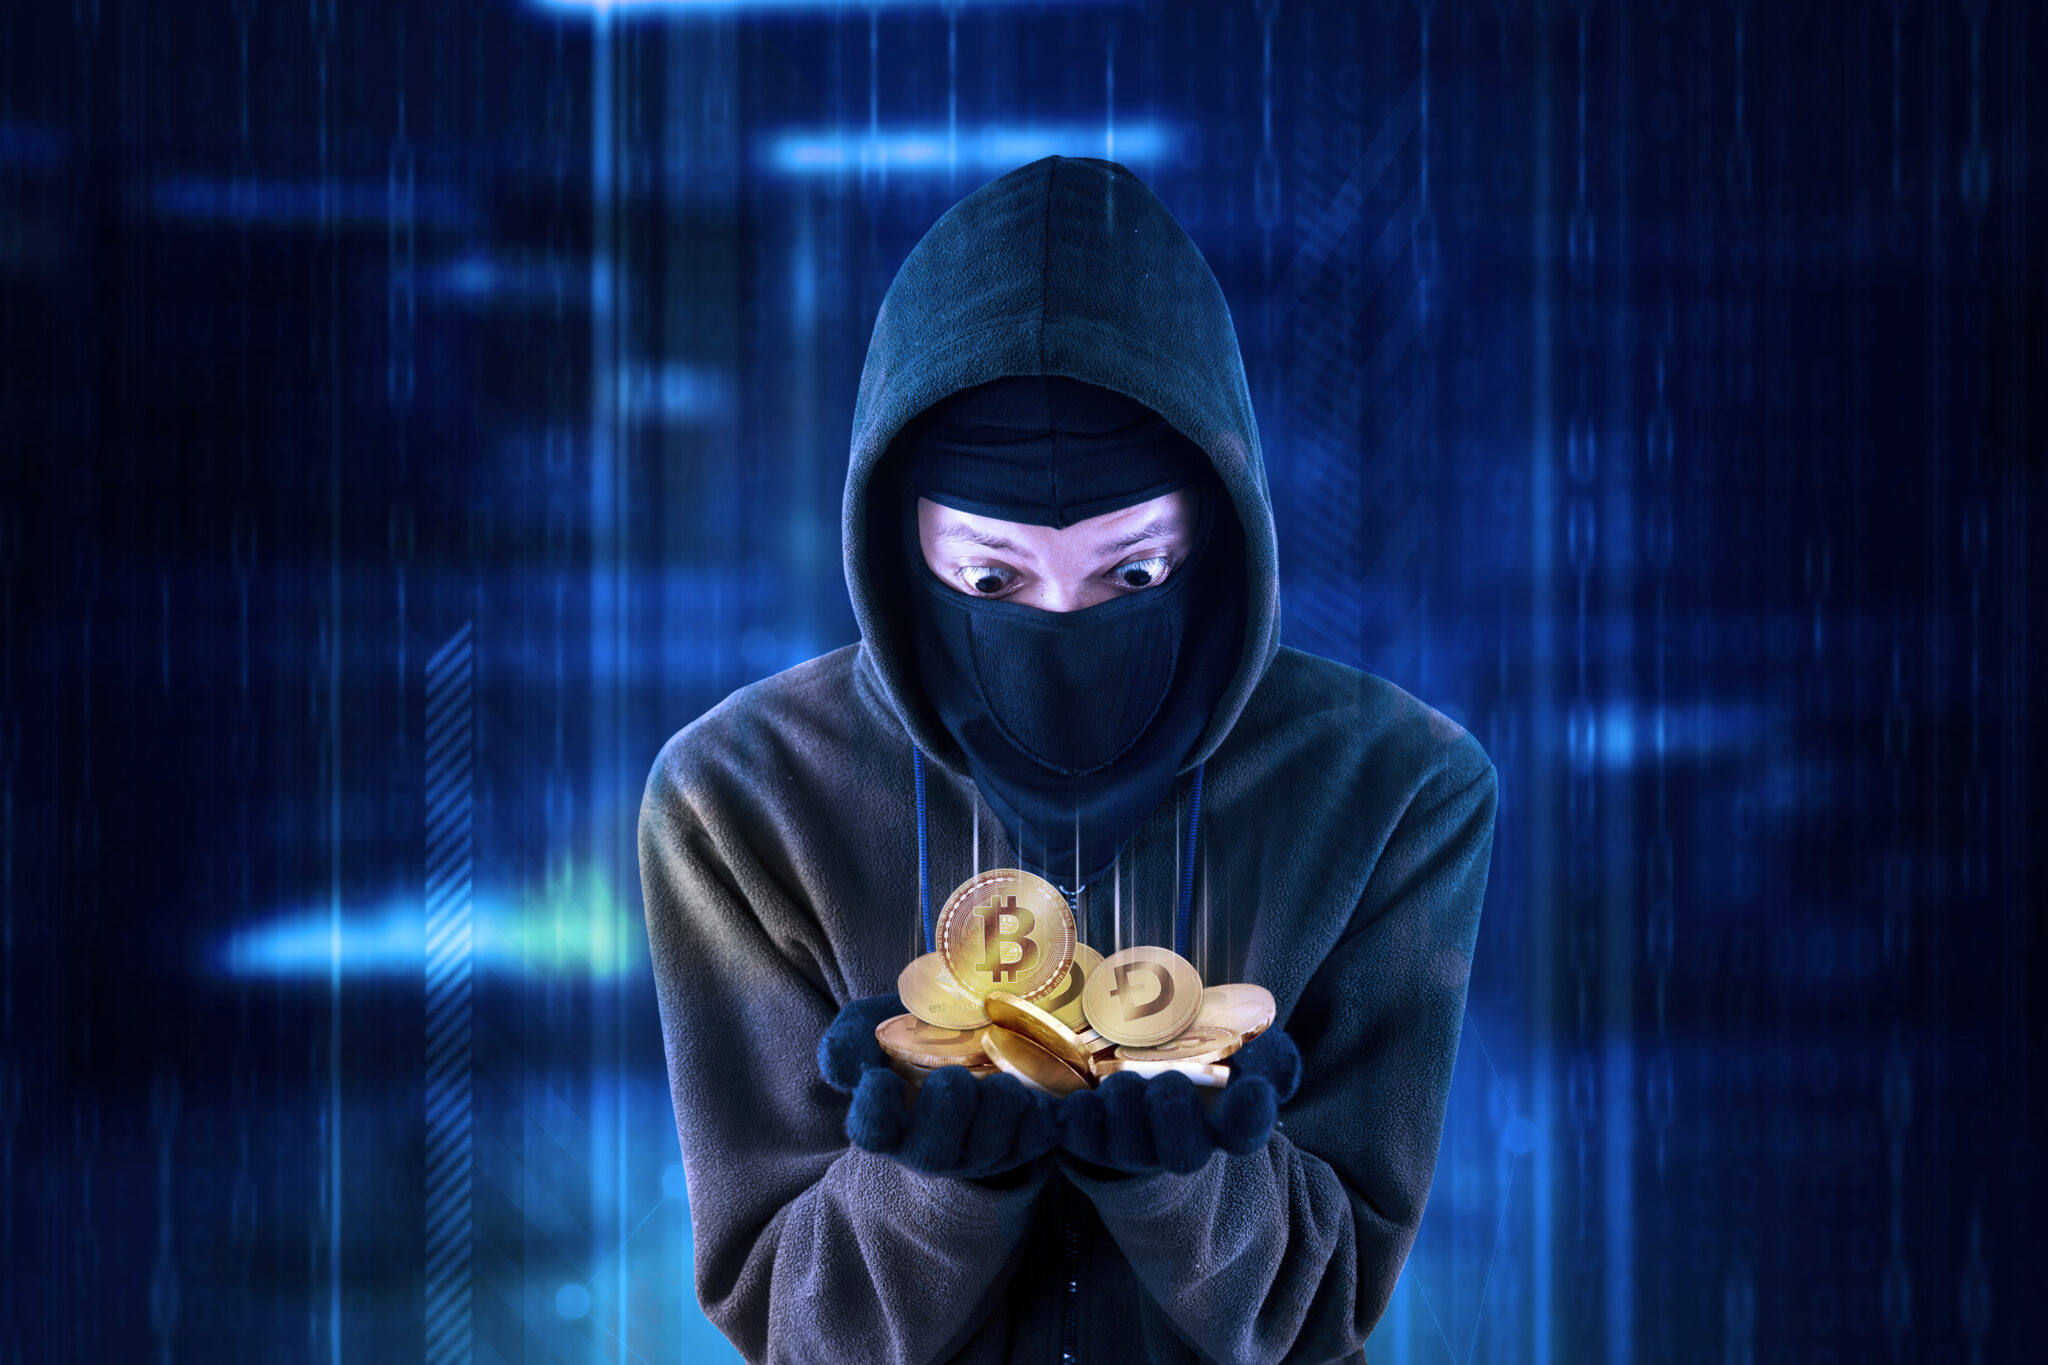 Hooded hacker looks shocked while getting cryptocurrency coins and standing with virtual screen background